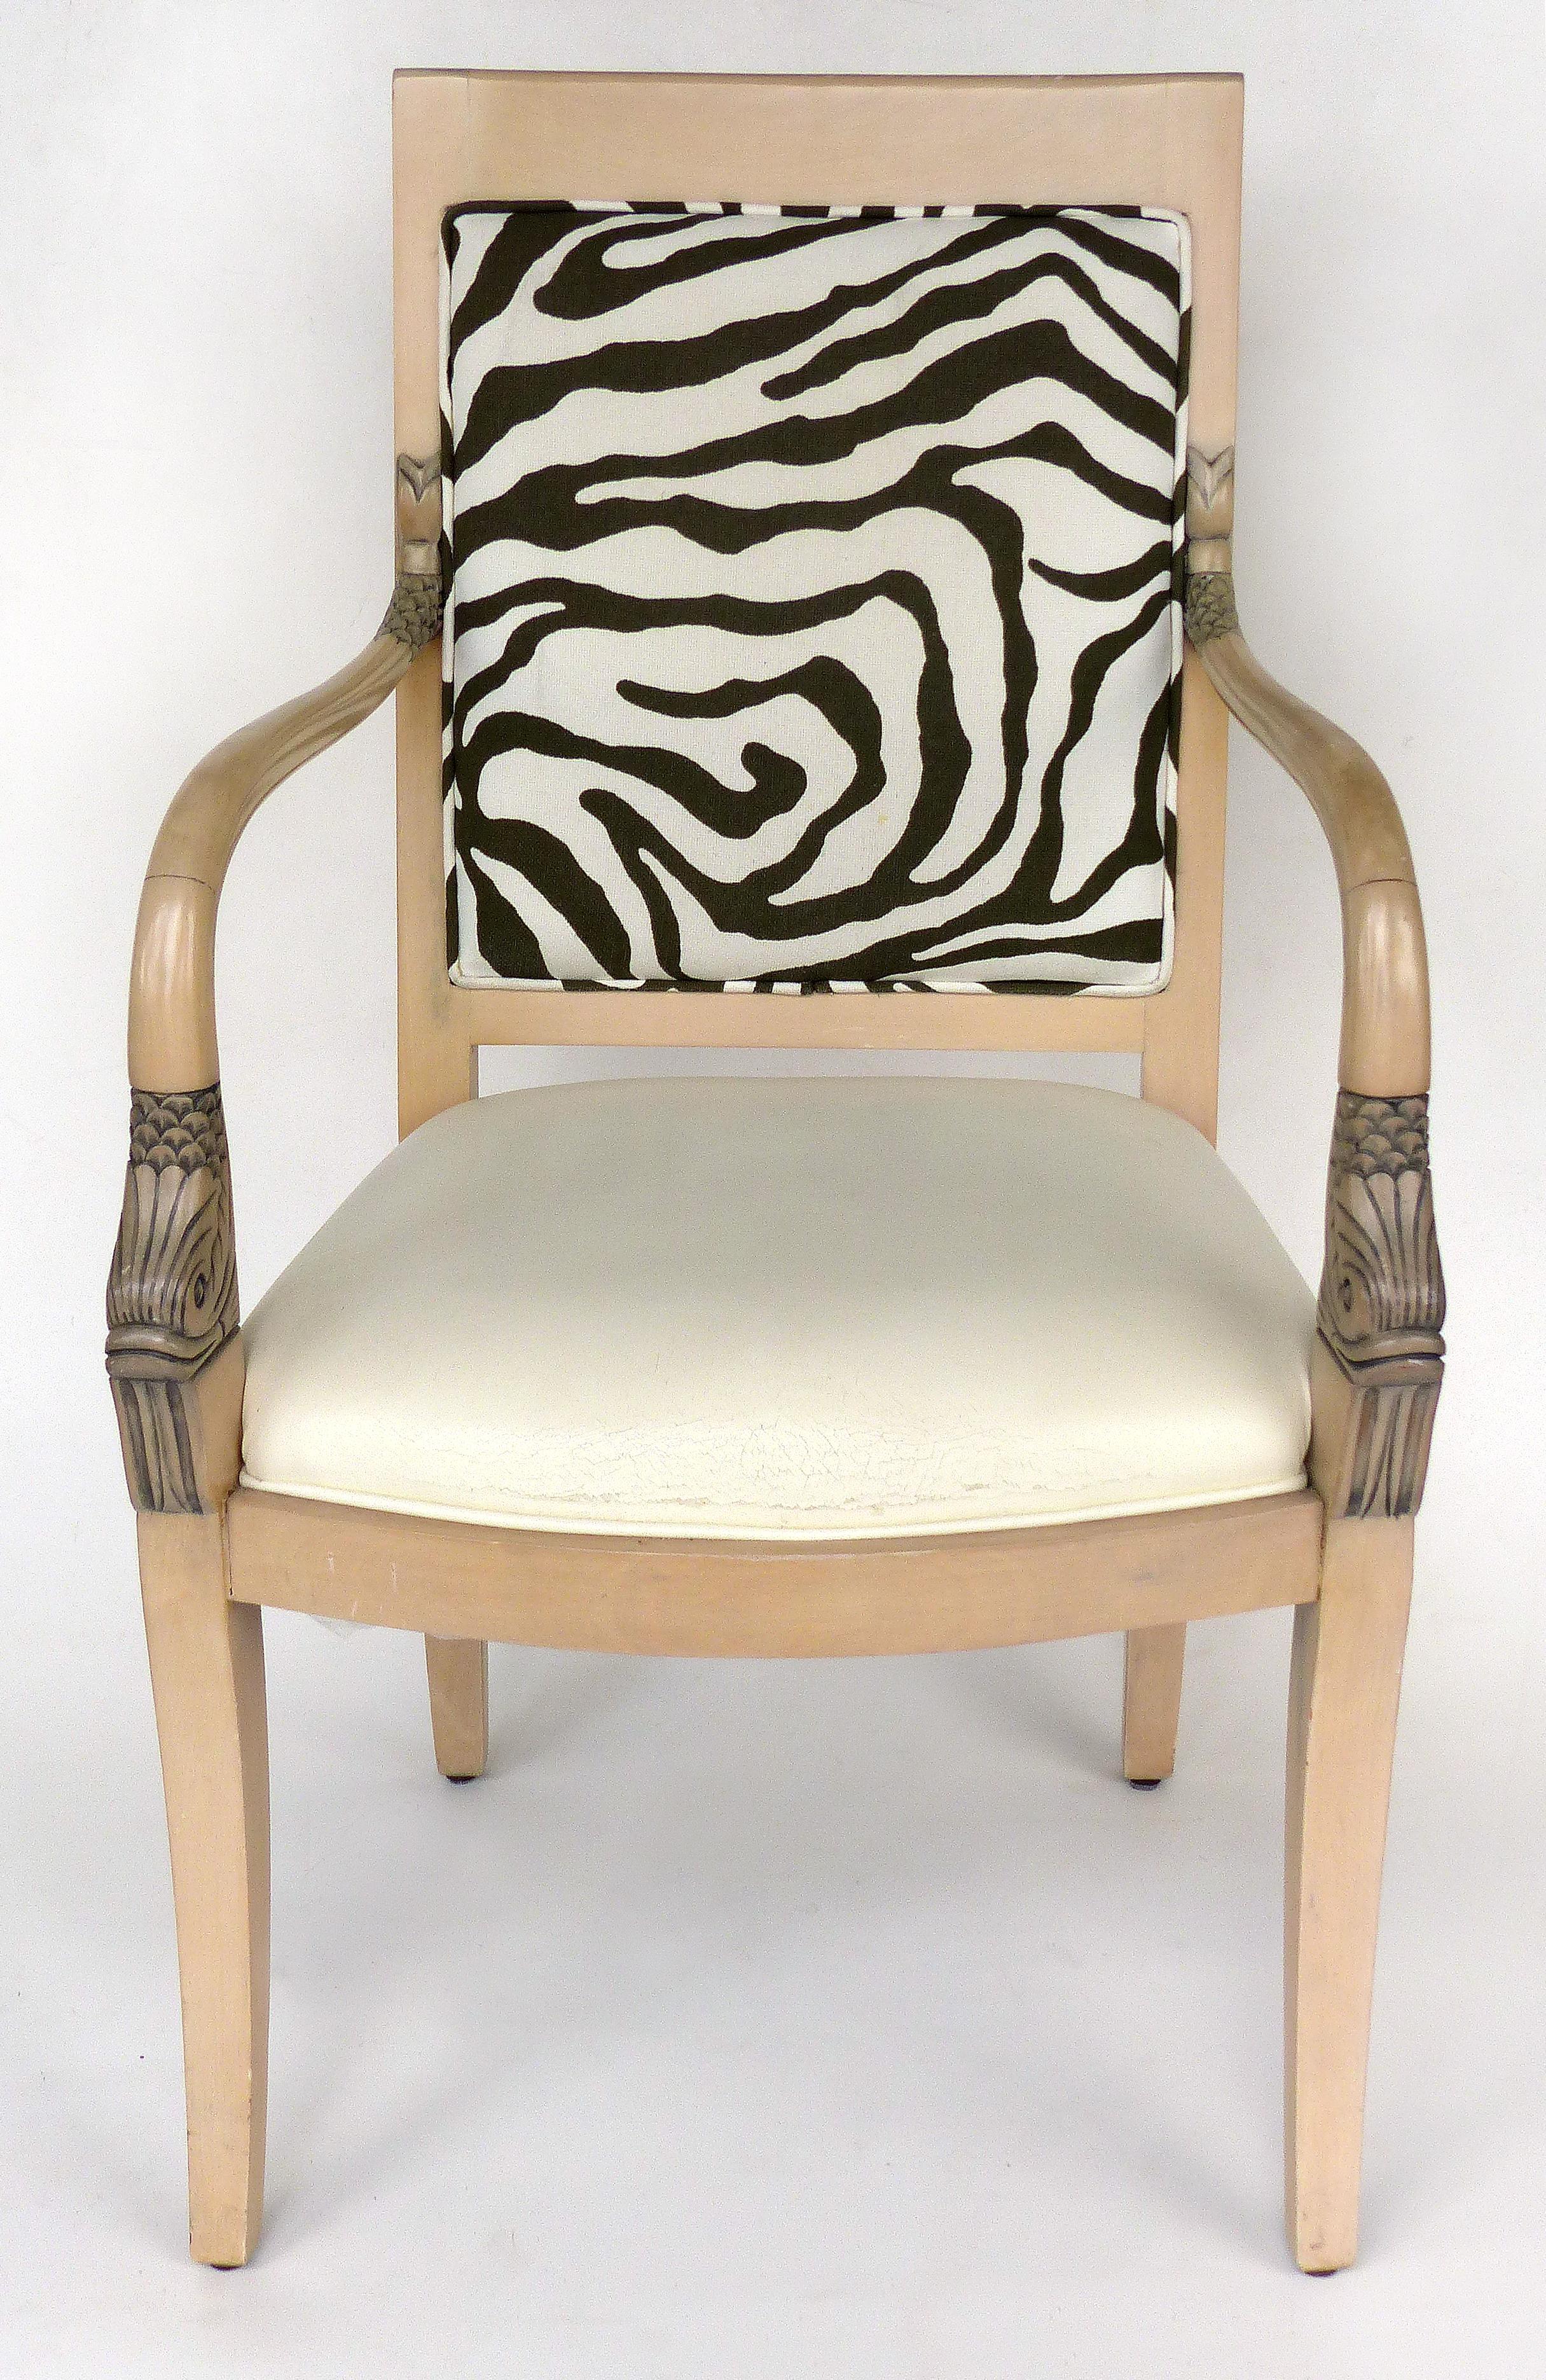 Armchairs of Blond Wood with Zebra Print Upholstery and Dolphin Carved Arms

Offered for sale is a pair of blond wood armchairs with dolphin carved arms and zebra print upholstery, the seats are in need of re-upholstery as pictured, arm, 29.75